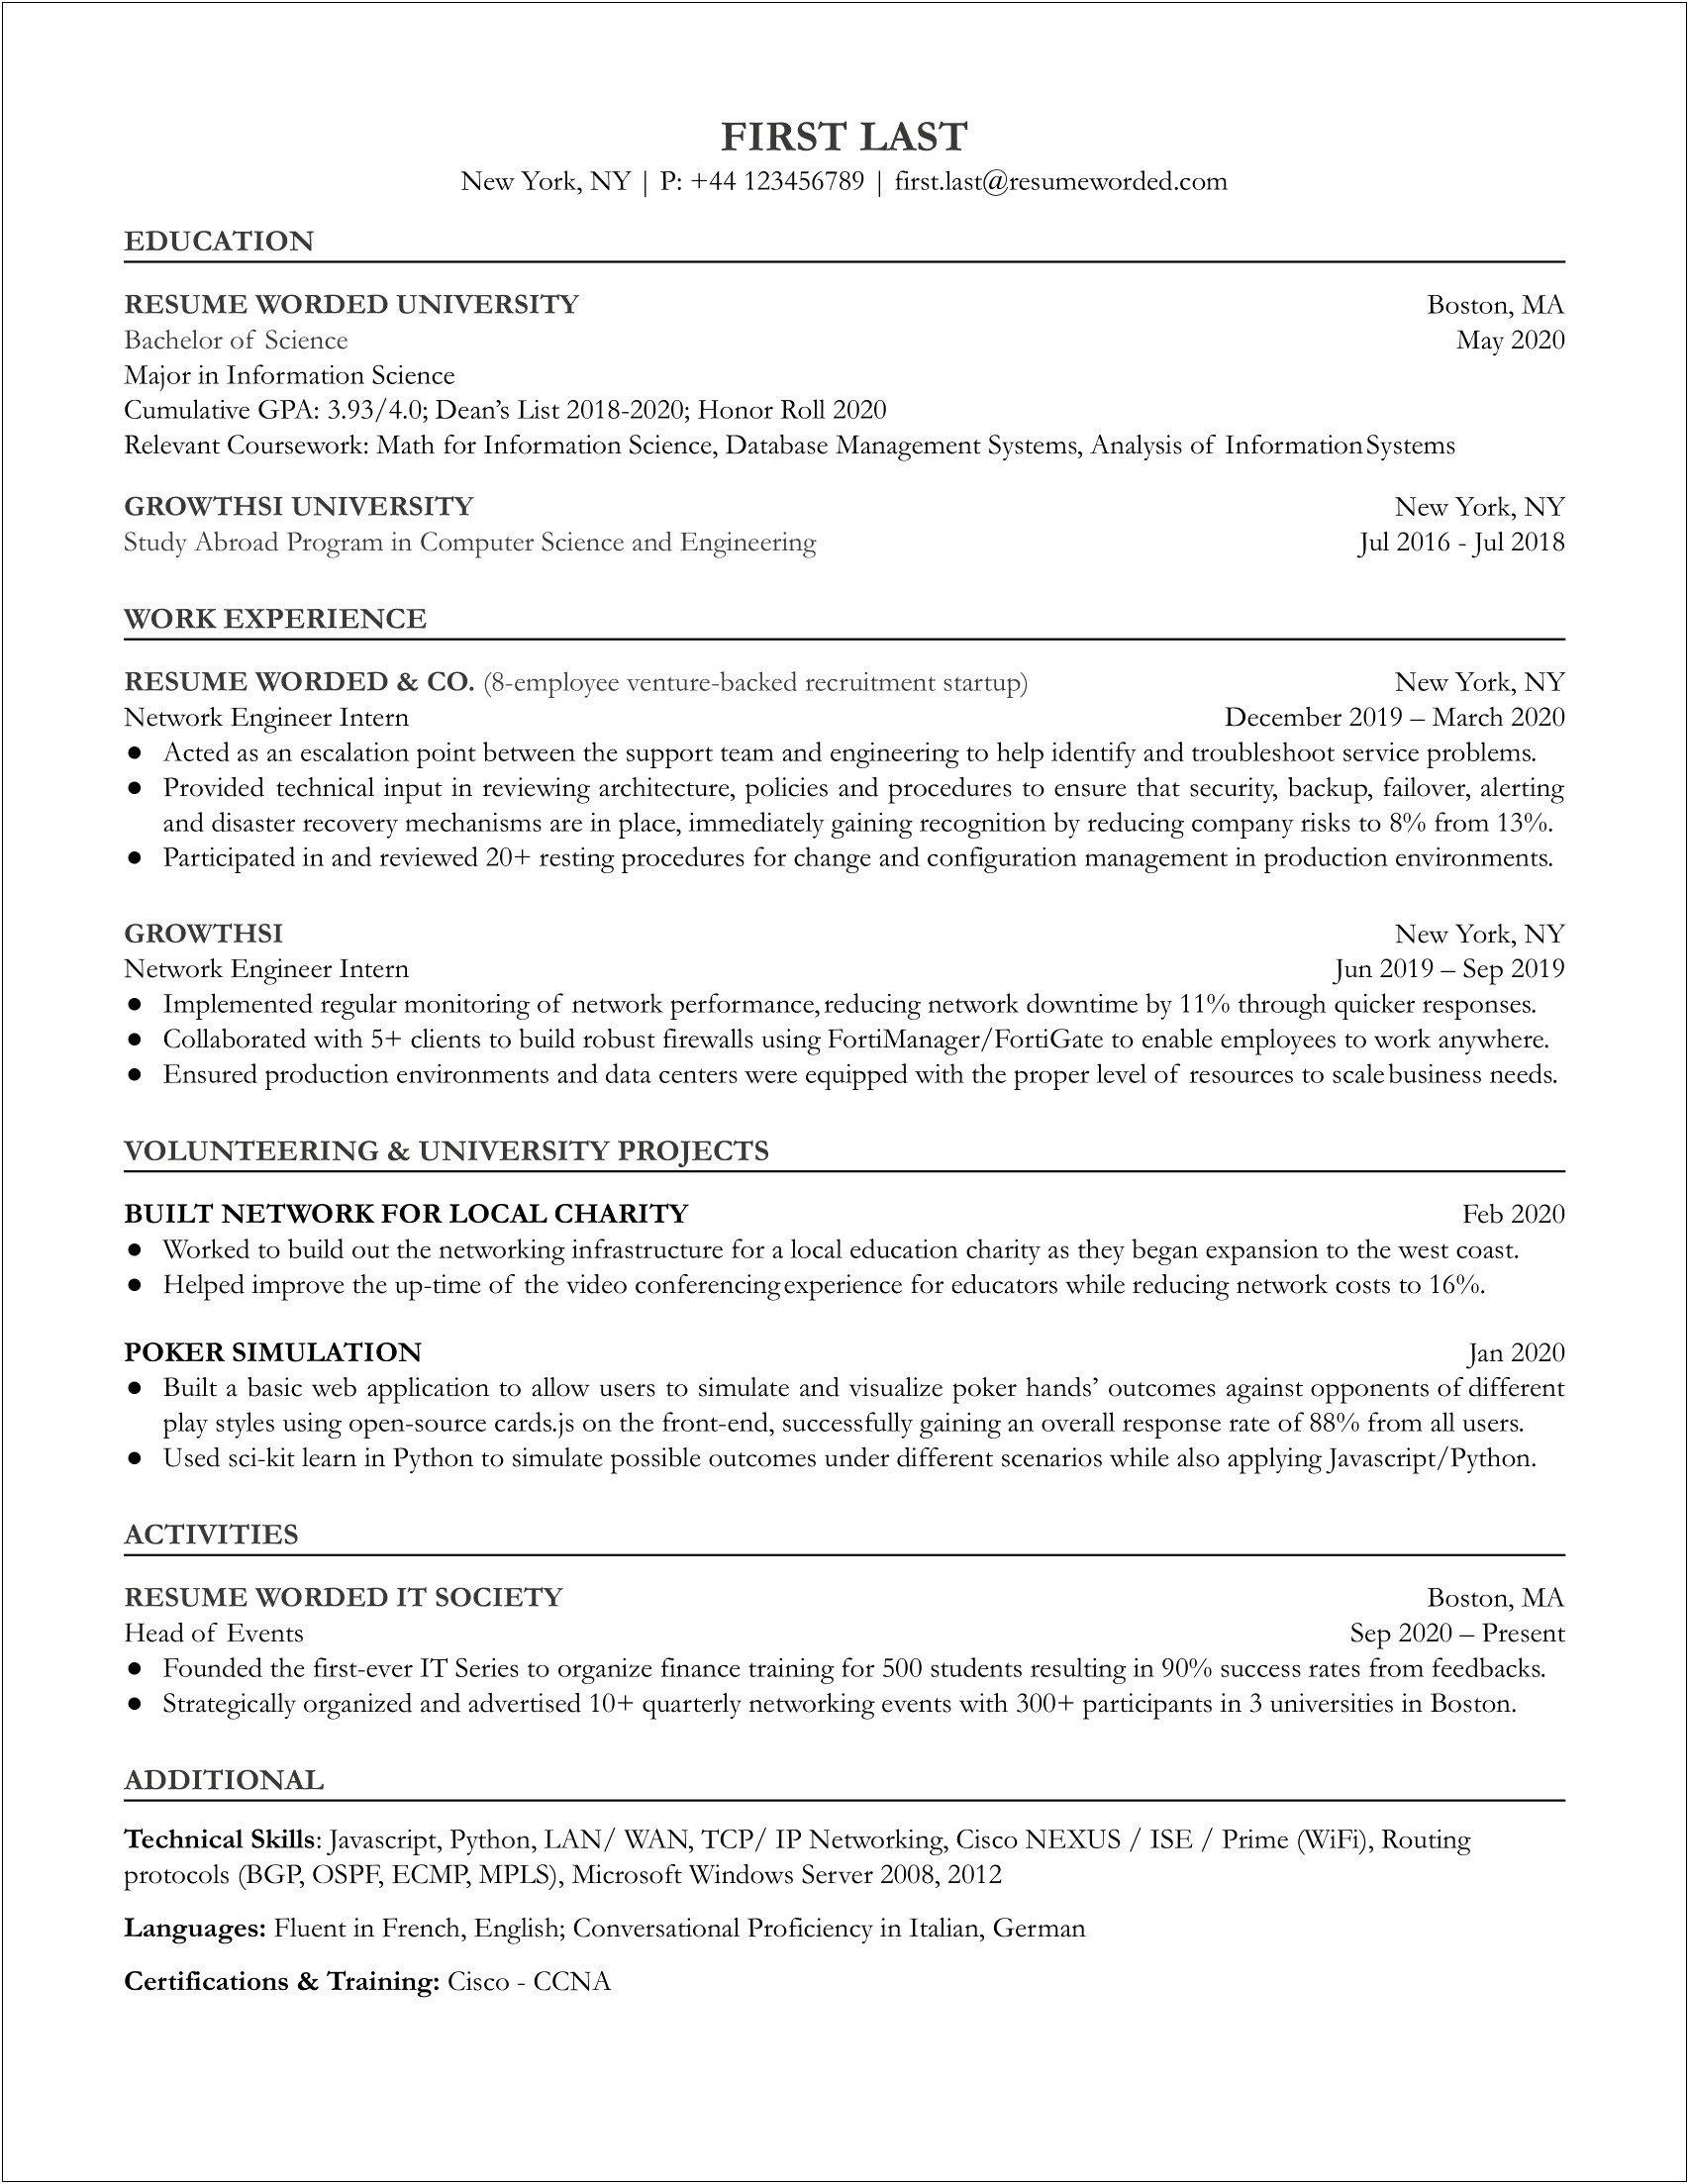 Network Engineer Resume With No Experience